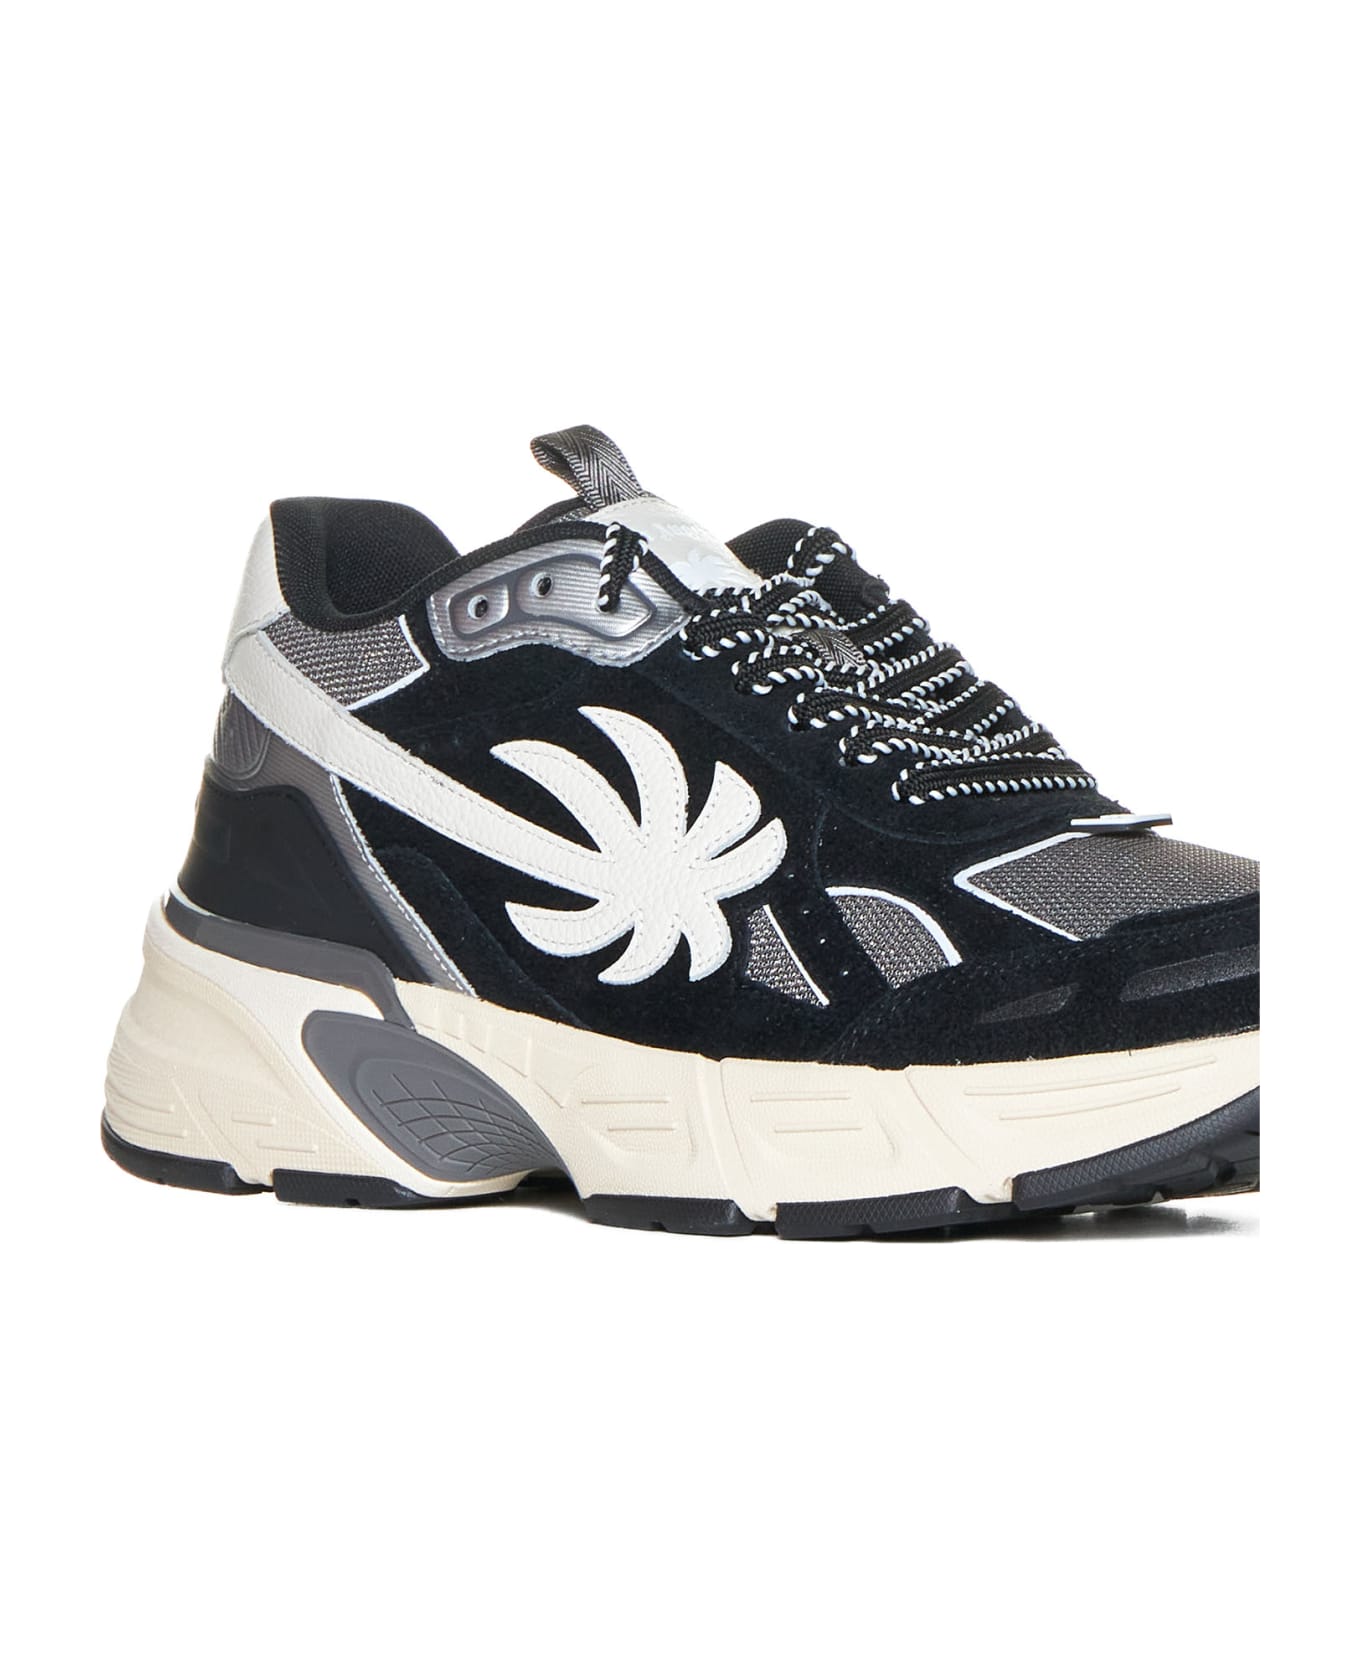 Palm Angels The Palm Runner Sneakers - Black Grey